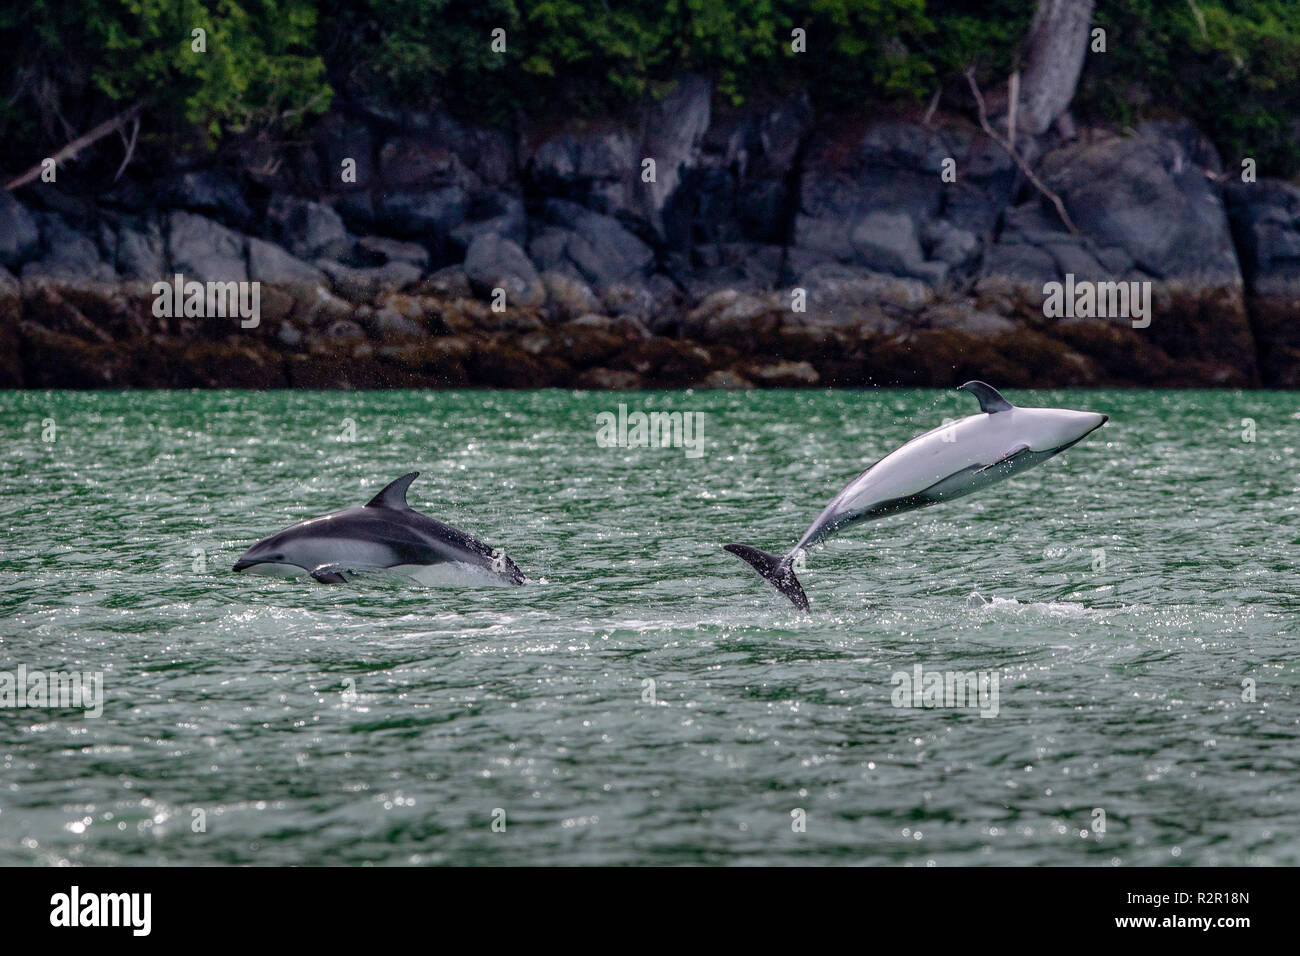 2 pacific white sided dolphins jumping close to shore in Knight Inlet, First Nations Territory, British Columbia, Canada Stock Photo